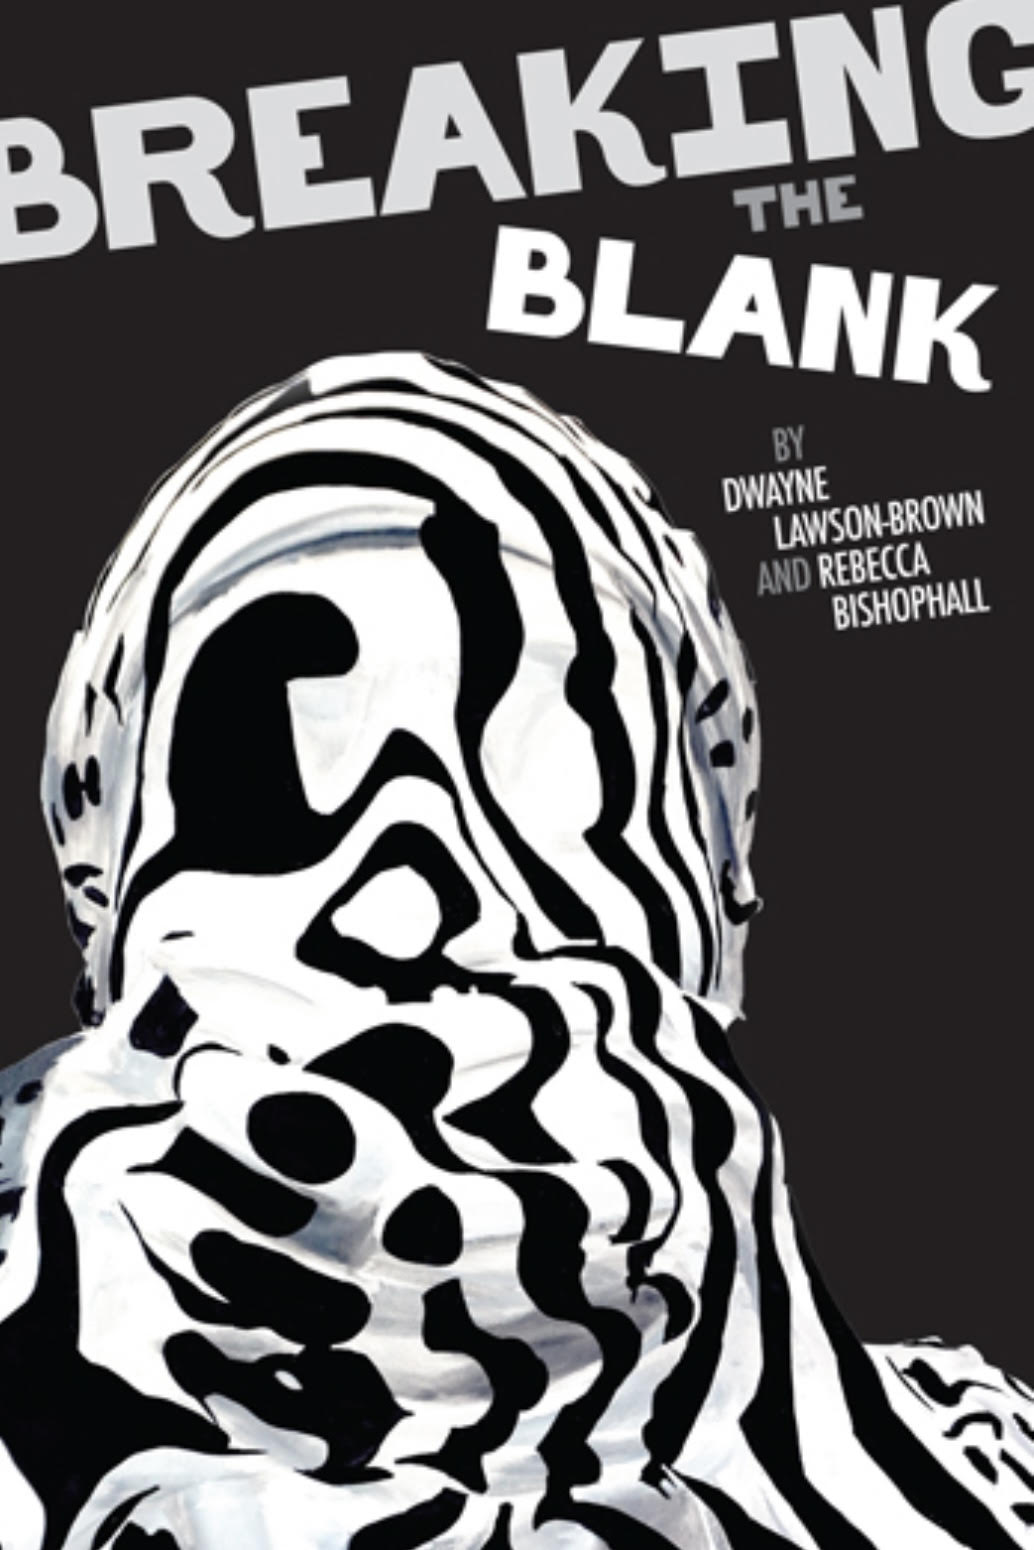 Book Cover Image of Breaking The Blank by Dwayne Lawson-Brown and Rebecca BishopHall